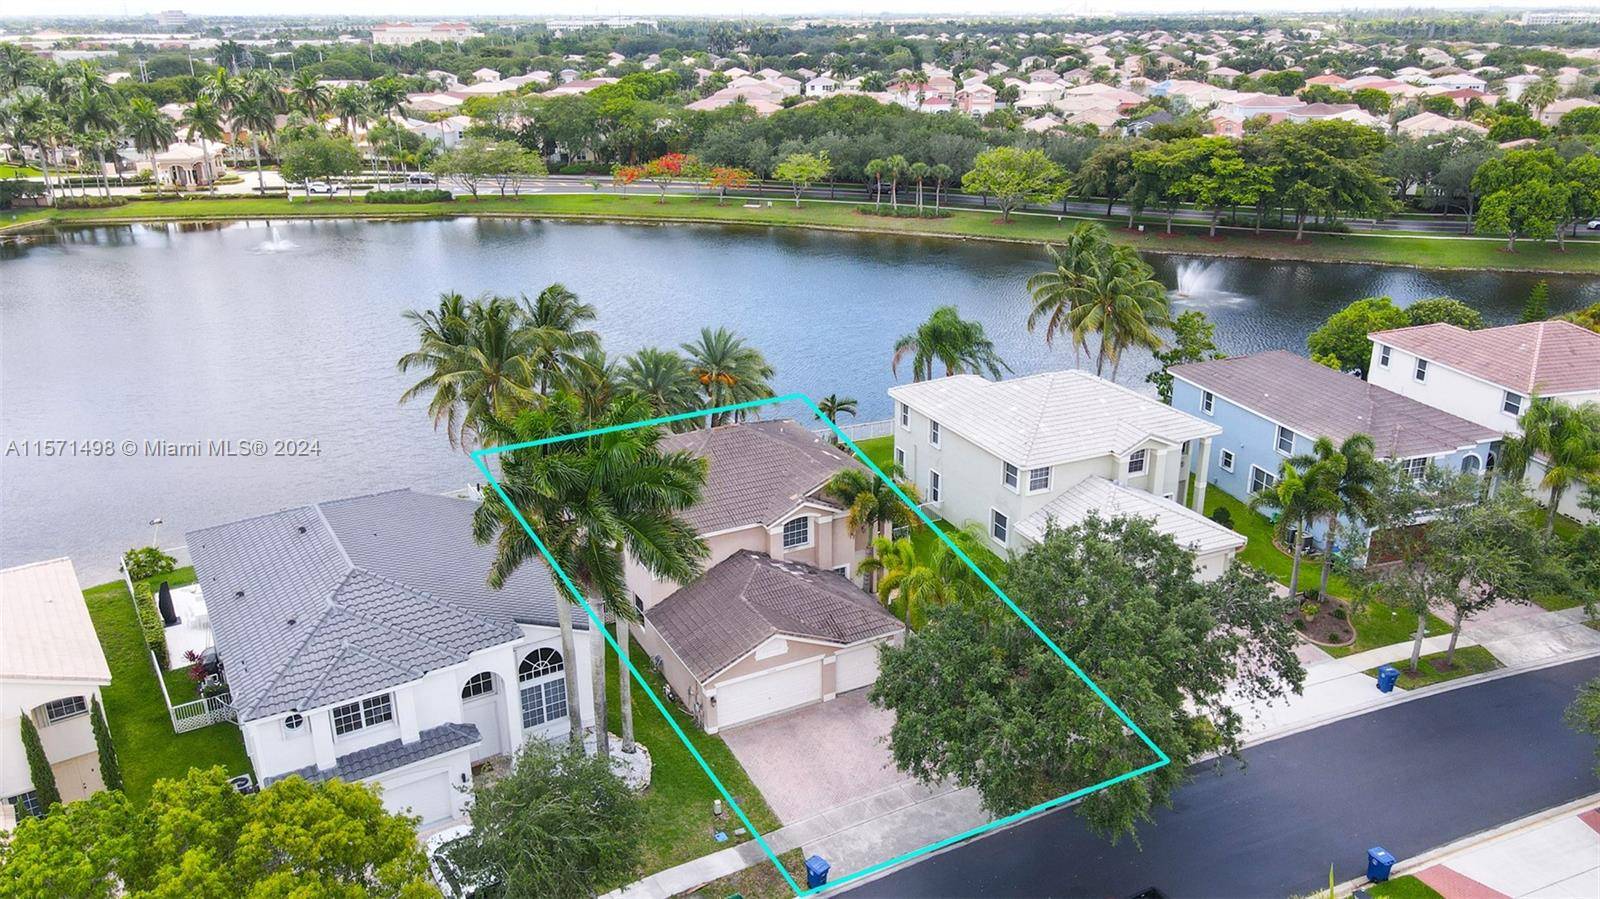 Spectacular 5 Bedroom 3 Bathroom Waterfront Home with Pool and 3 Car Garage.